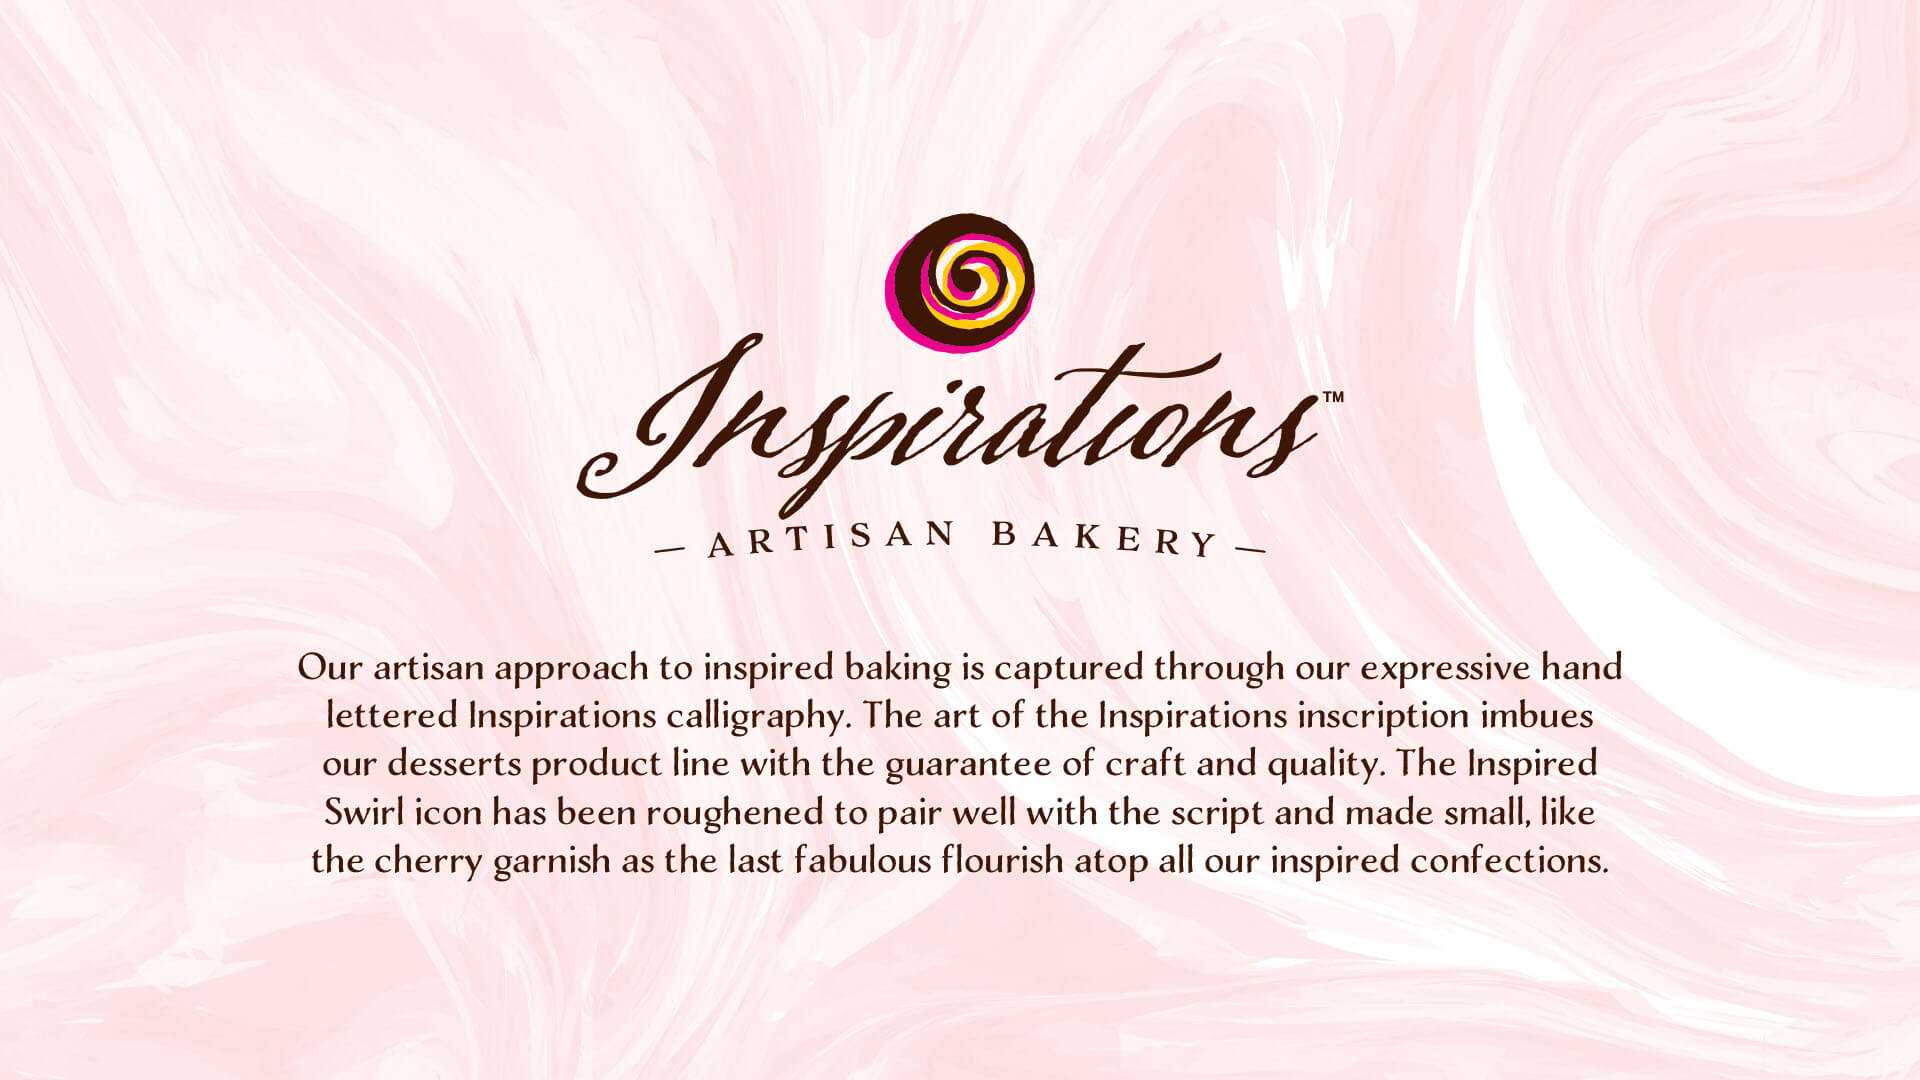 UniPro Inspirations Artisan Bakery – Our artisan approach to inspired baking is captured through our expressive hand lettered Inspirations calligraphy. The art of the Inspirations inscription imbues our desserts product line with the guarantee of craft and quality. The Inspired Swirl icon has been roughened to pair well with the script and made small, like the cherry garnish as the last fabulous flourish atop all our inspired confections.